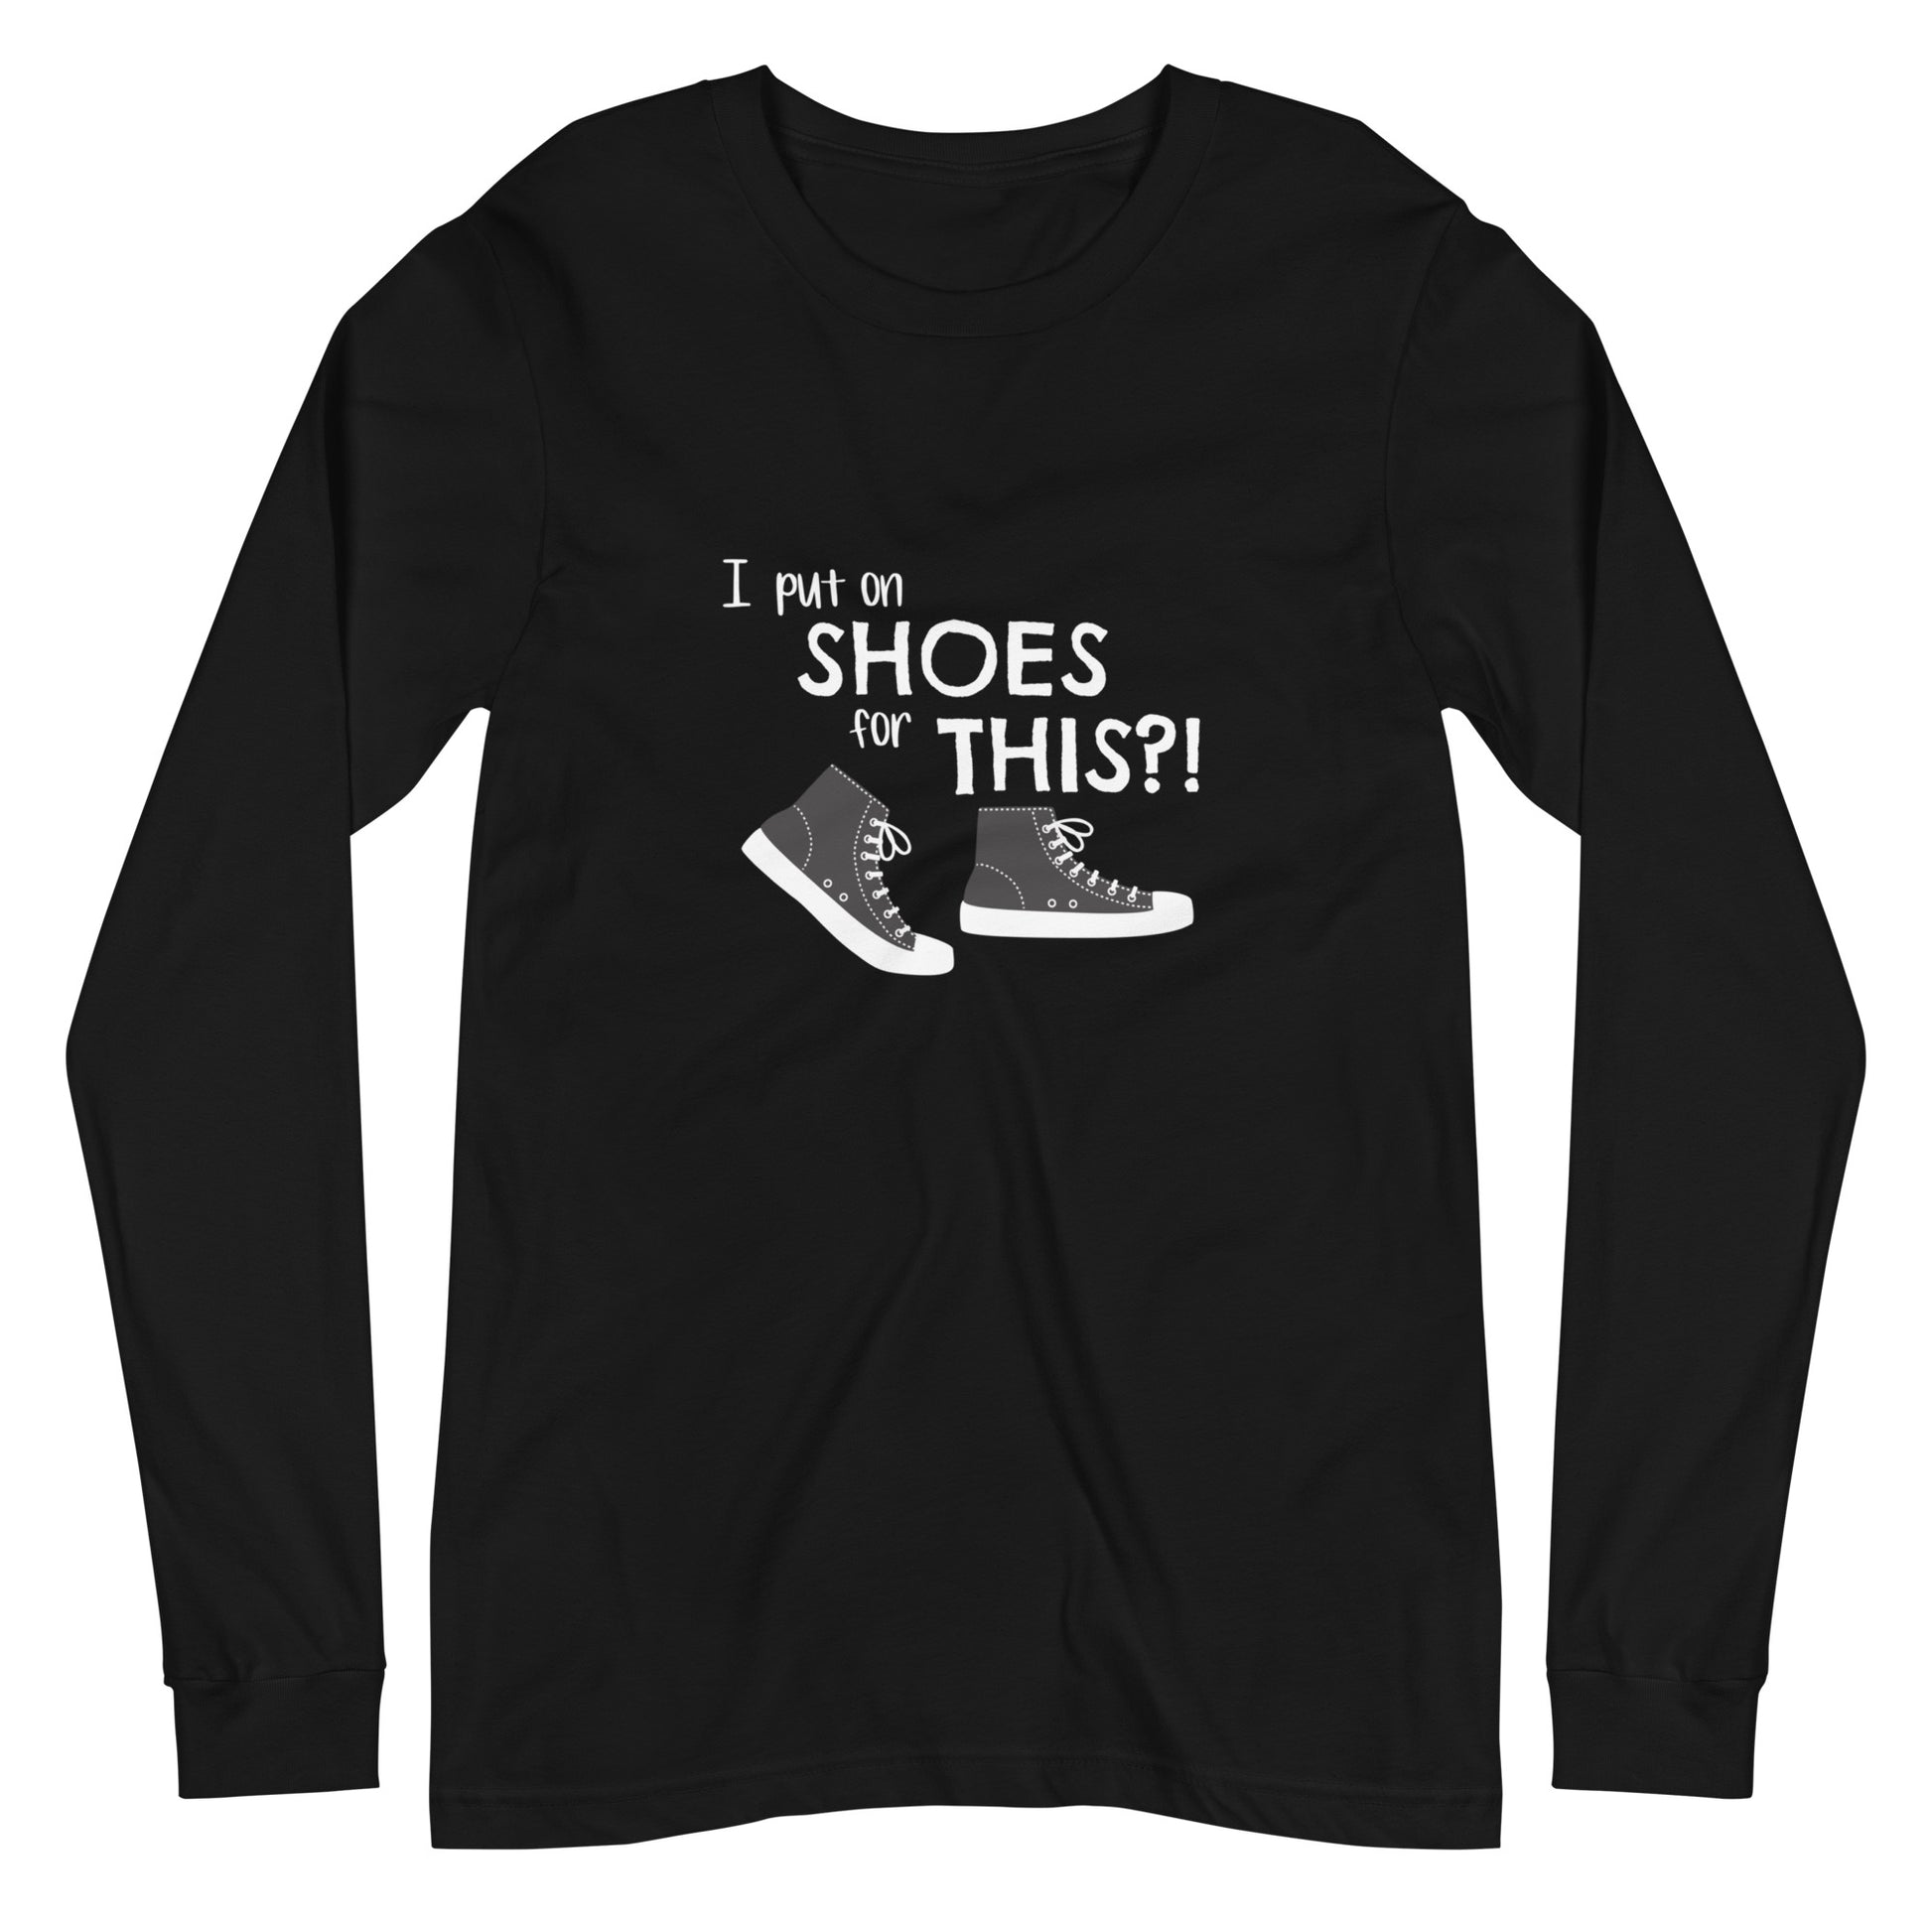 Black long-sleeve t-shirt with graphic of black and white canvas "chuck" sneakers and text: "I put on SHOES for THIS?!"